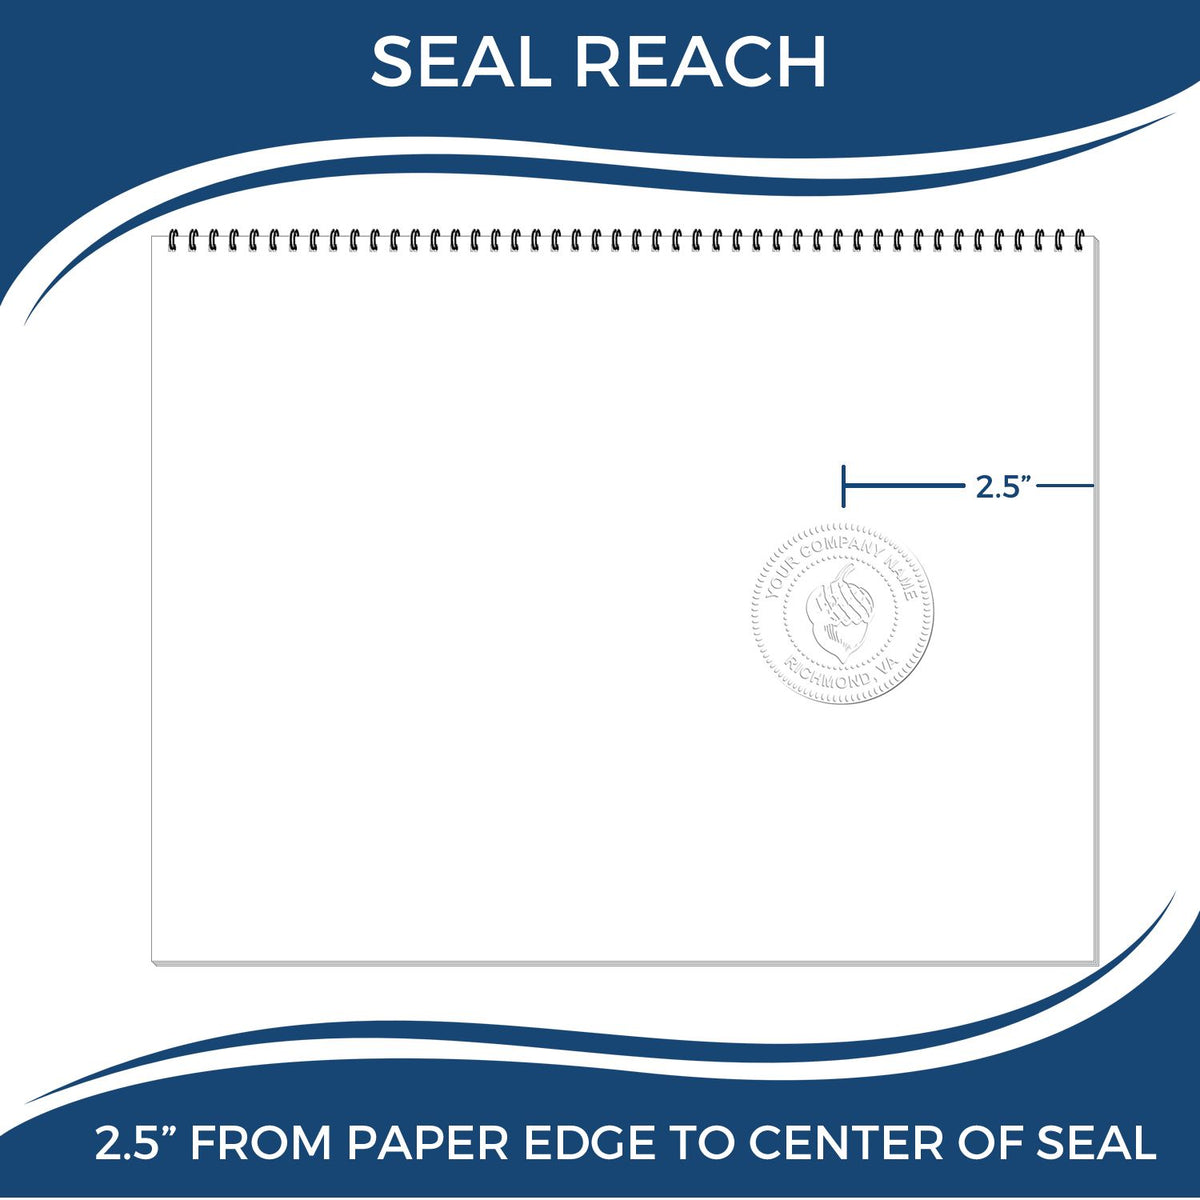 An infographic showing the seal reach which is represented by a ruler and a miniature seal image of the State of Kentucky Long Reach Architectural Embossing Seal